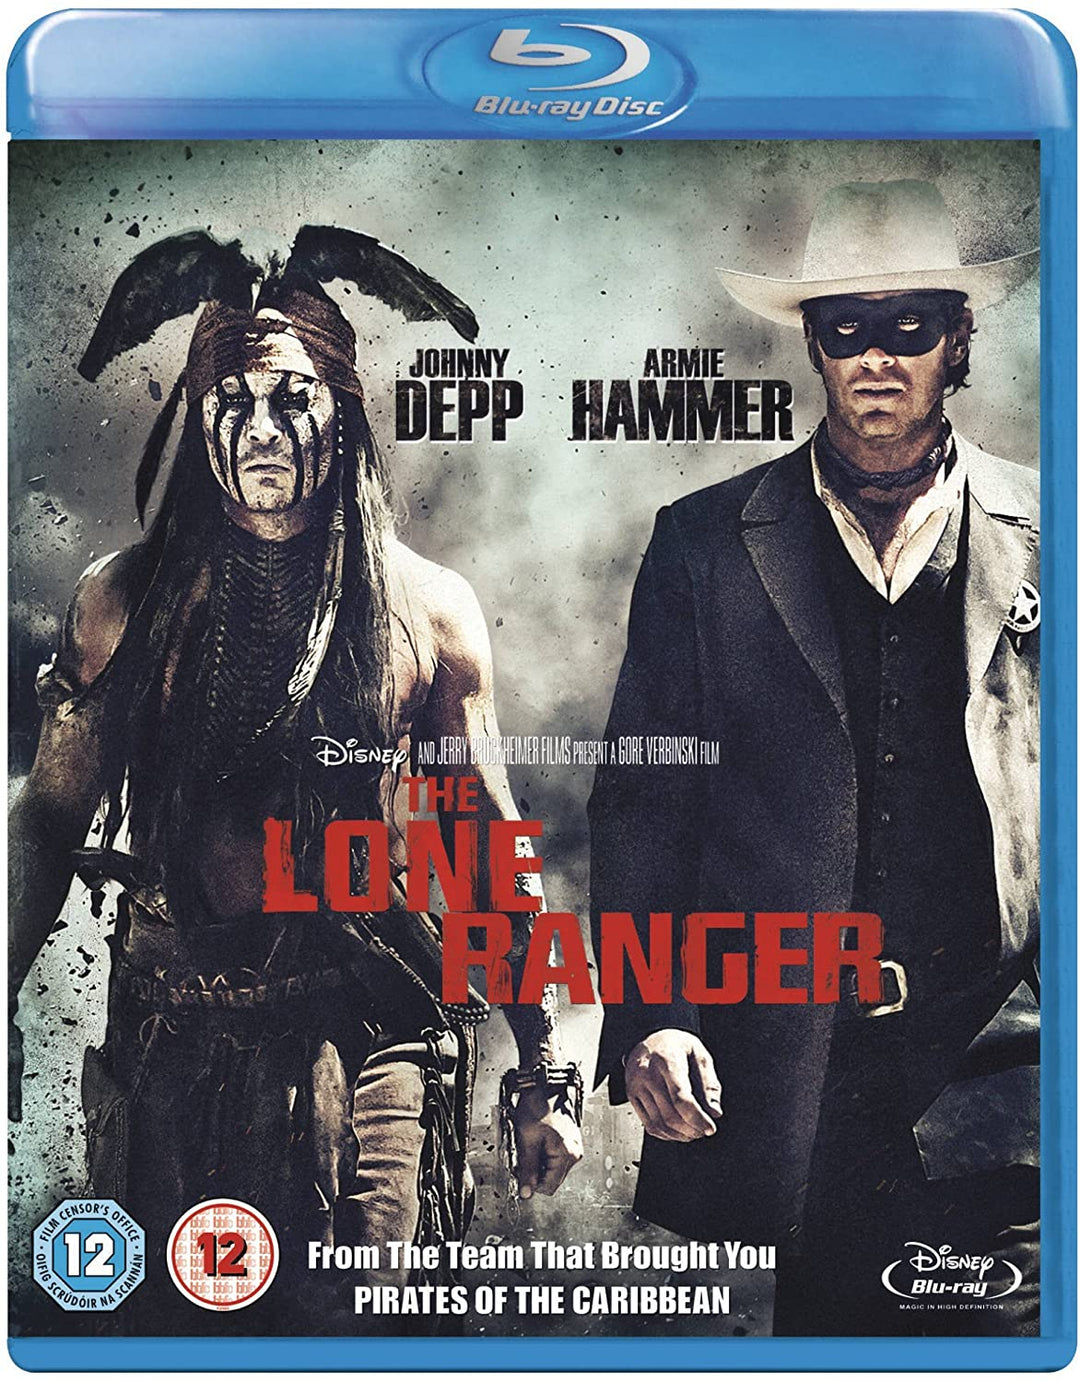 Le Ranger solitaire (Blu-ray)